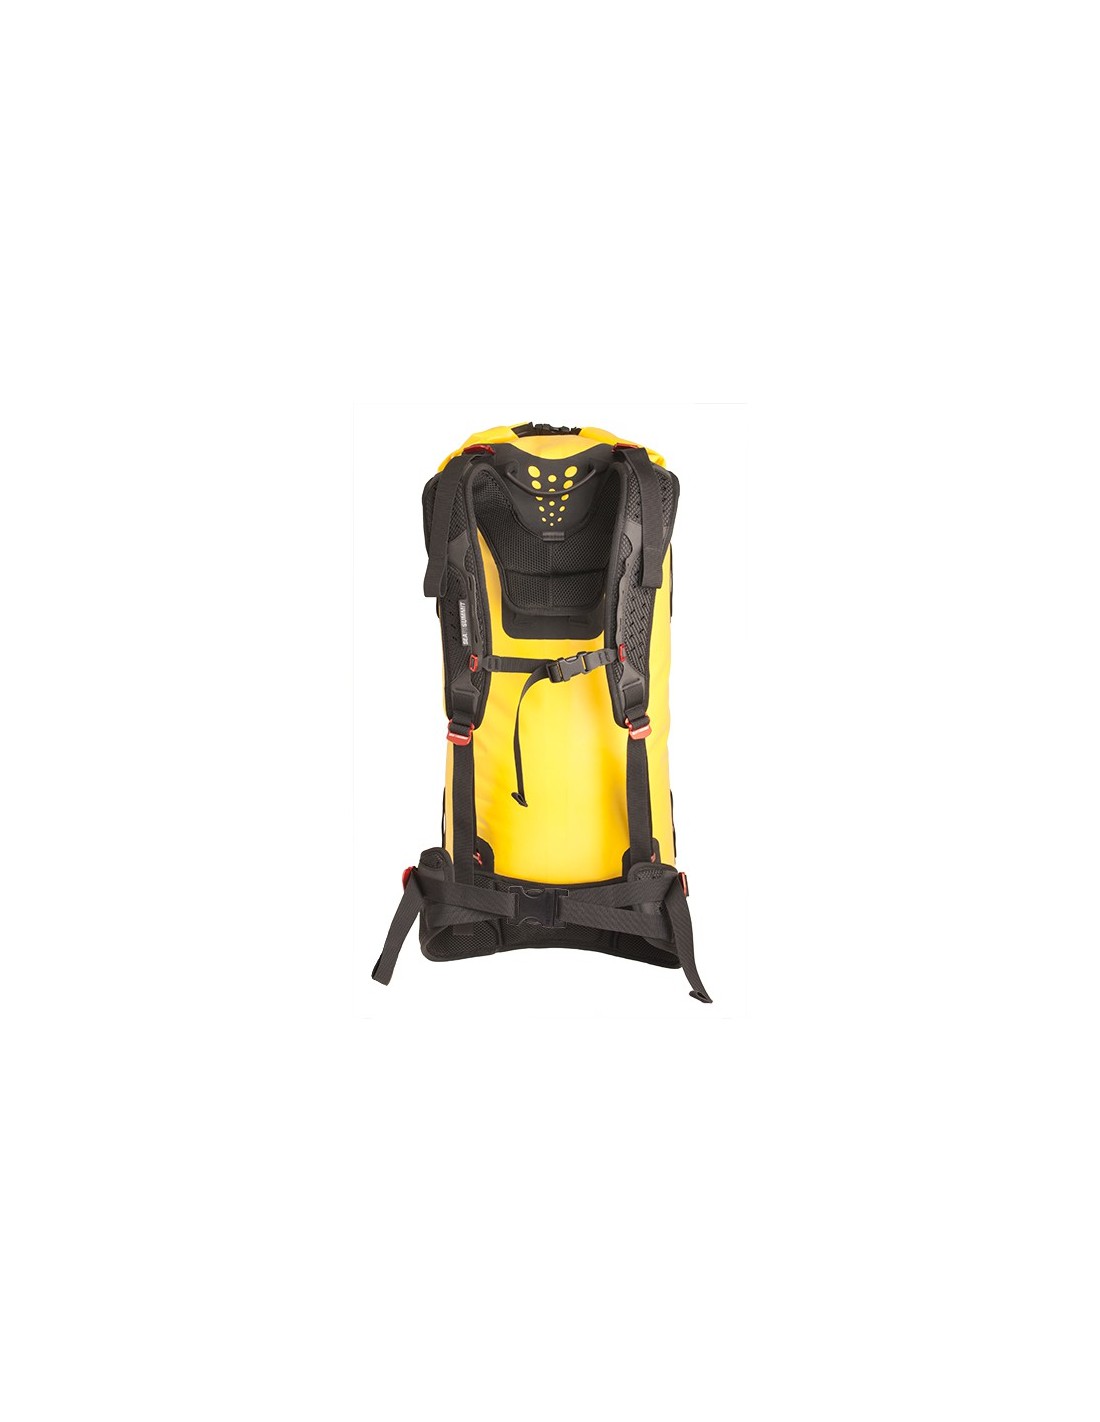 Sea To Summit Hydraulic Dry Pack with Harness 65L Yellow Beutelfarbe - Gelb, von Sea To Summit